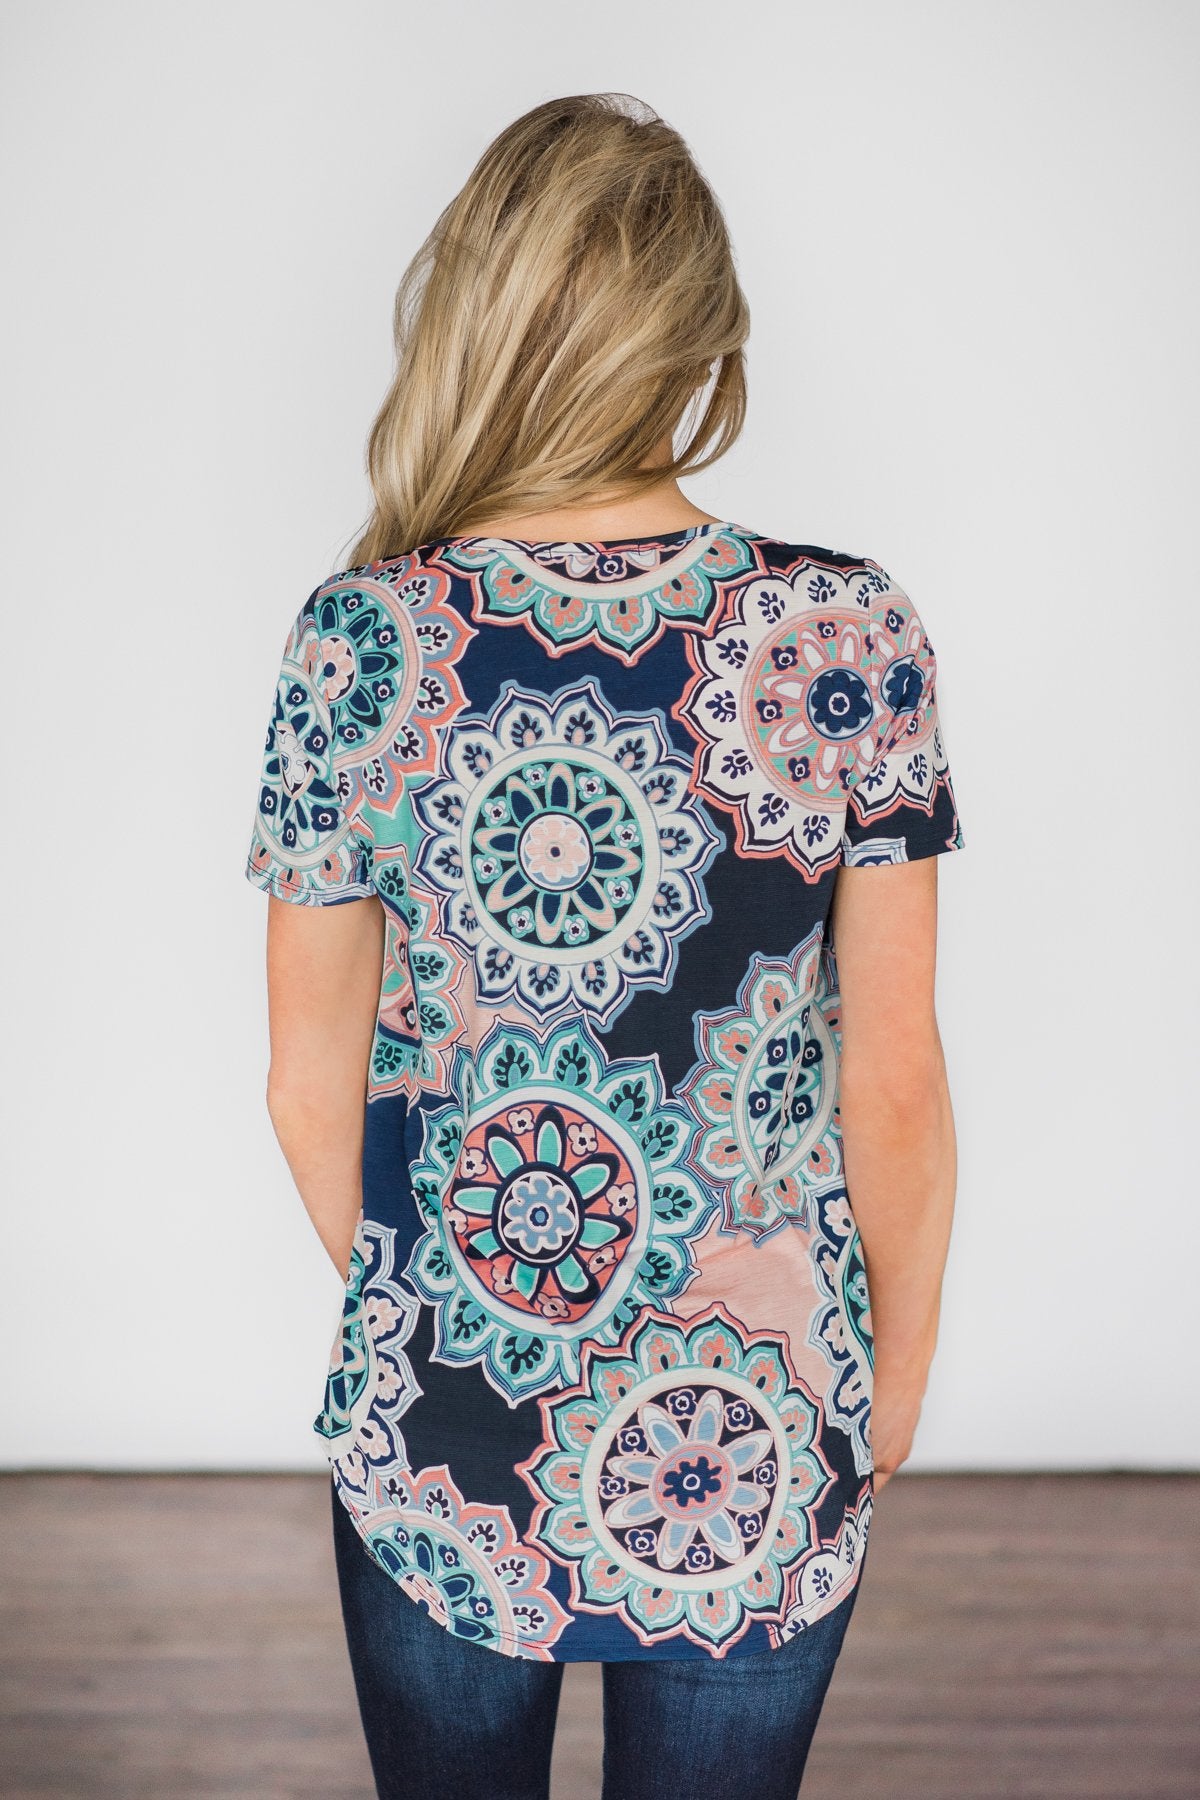 You're Unforgettable Criss Cross Top - Navy